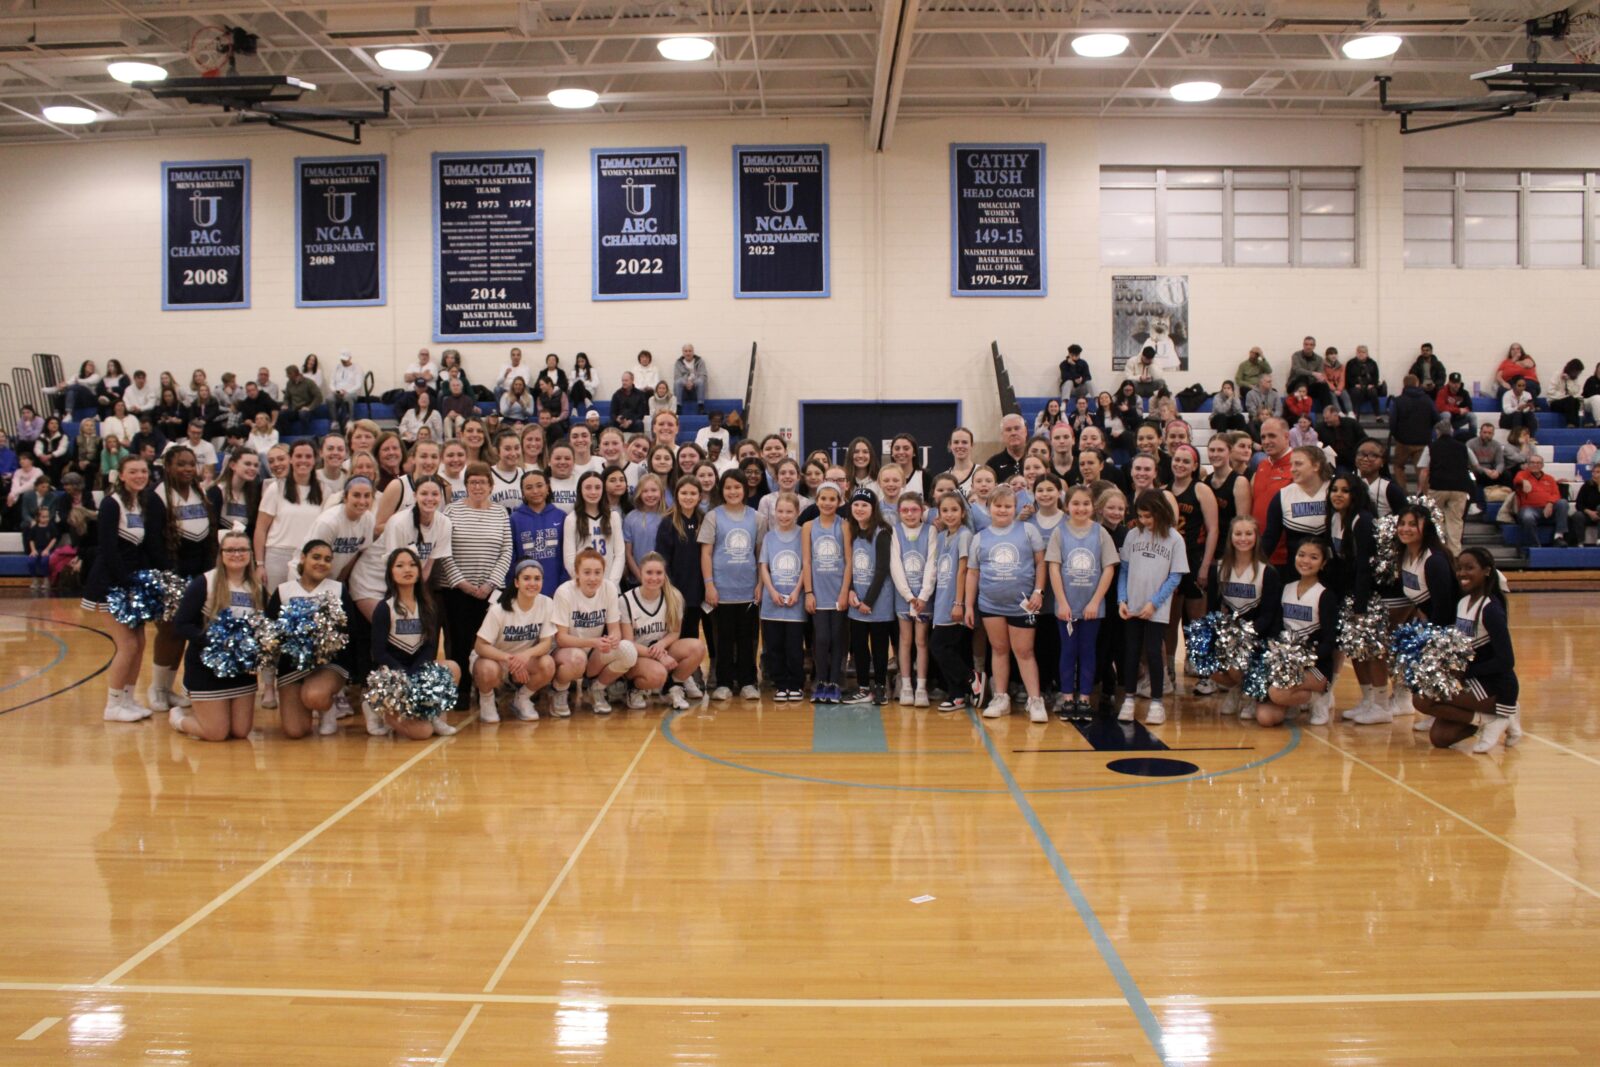 Athletes Honored During Immaculata University Game